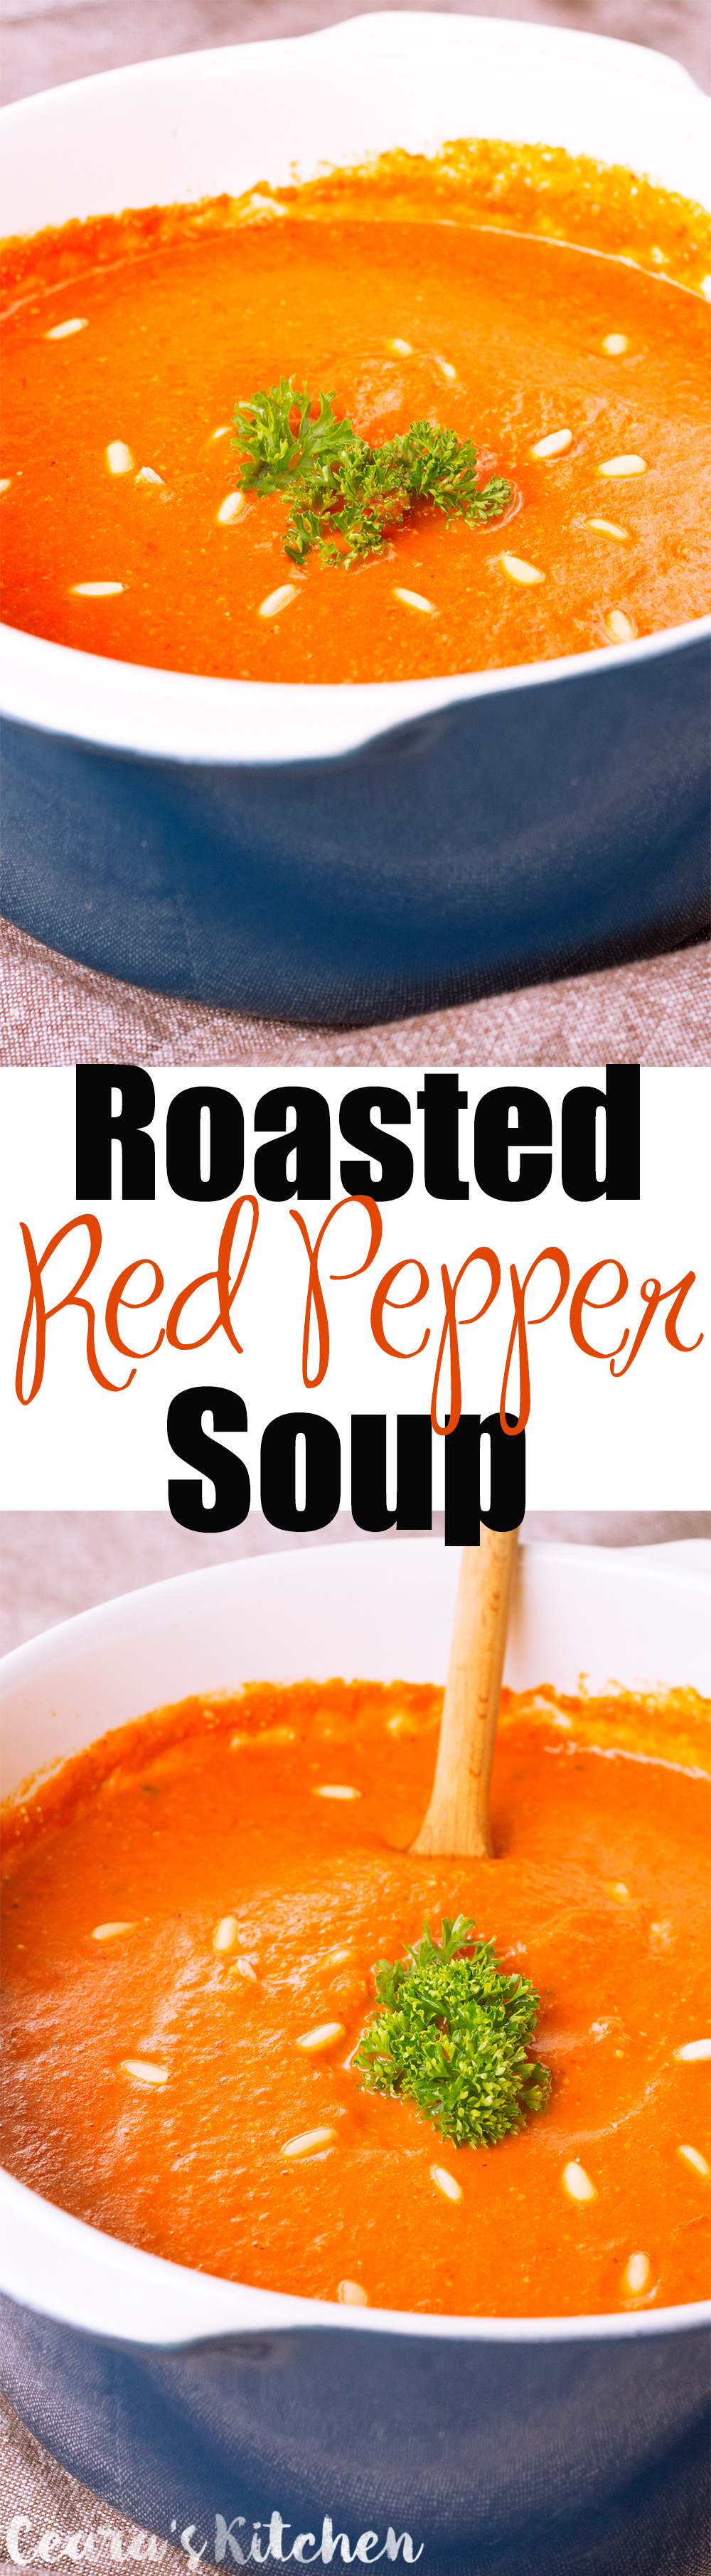 healthy roasted red	